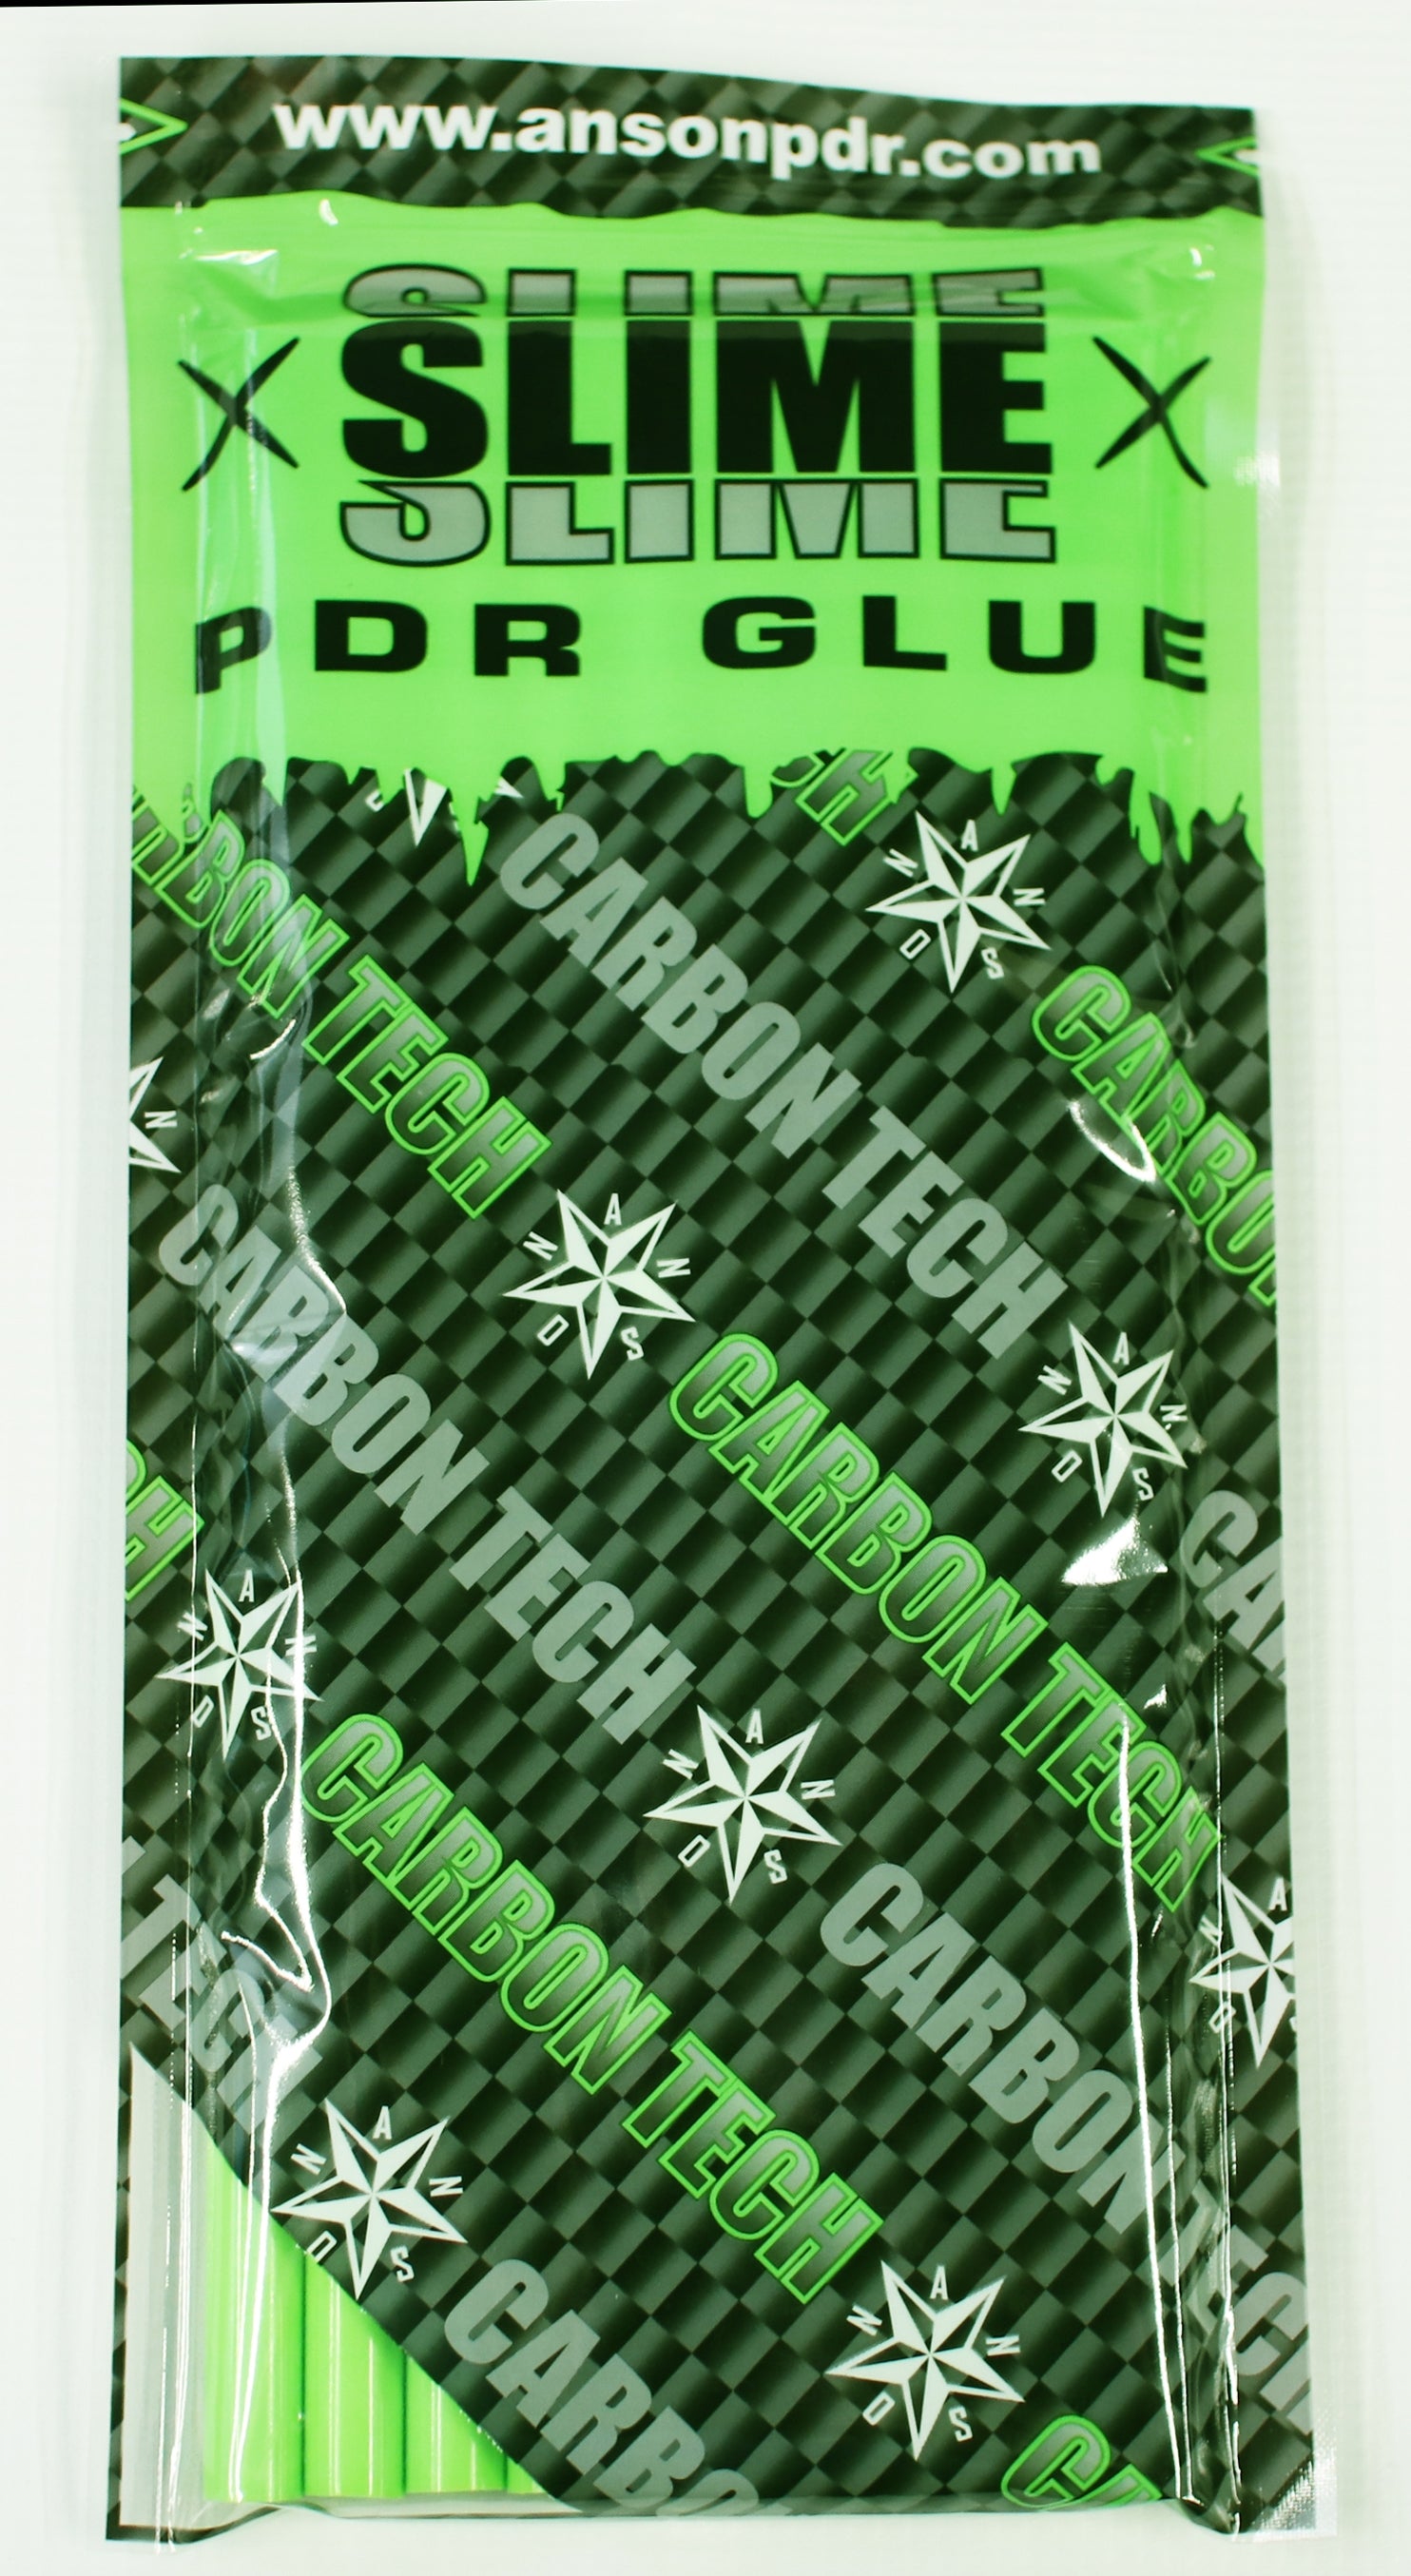 Carbon Tech Slime PDR Glue by Anson PDR